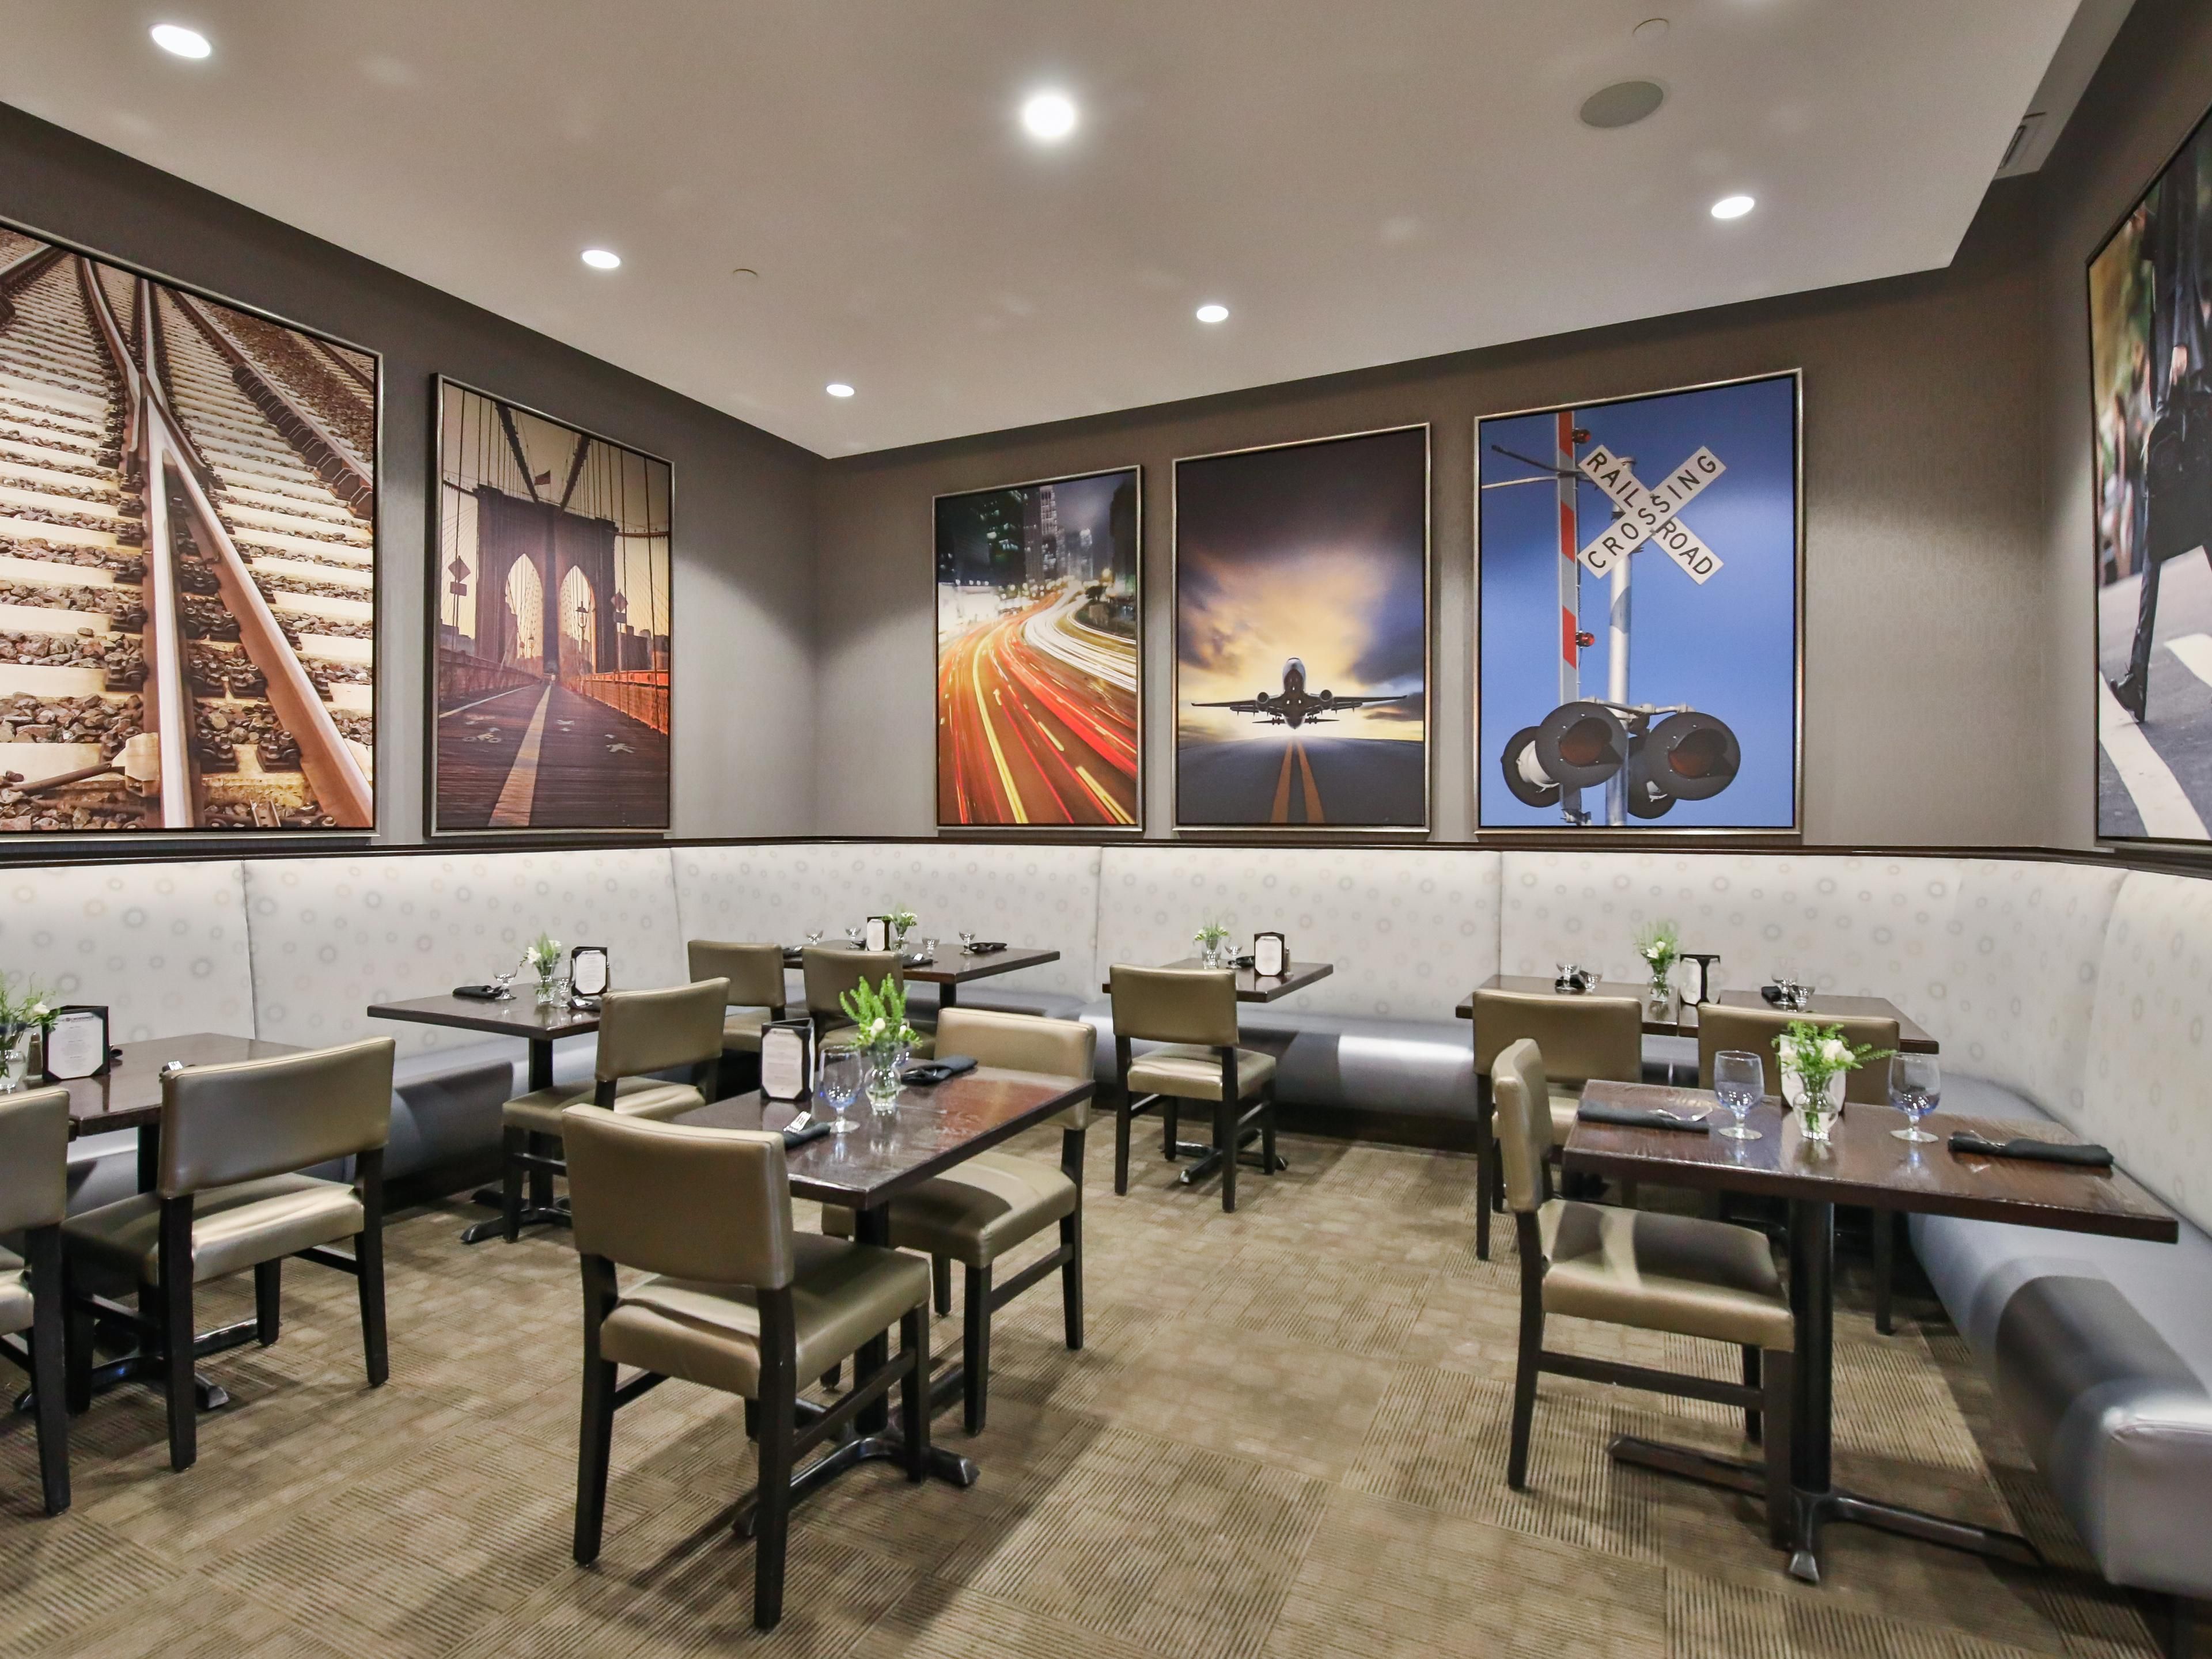 Indulge in delicious, locally sourced cuisine at The Crossings Restaurant, located right here at Crowne Plaza® Providence-Warwick (Airport). Our menu features fresh seafood, juicy steaks, and a variety of other tempting dishes that are sure to satisfy any palate.